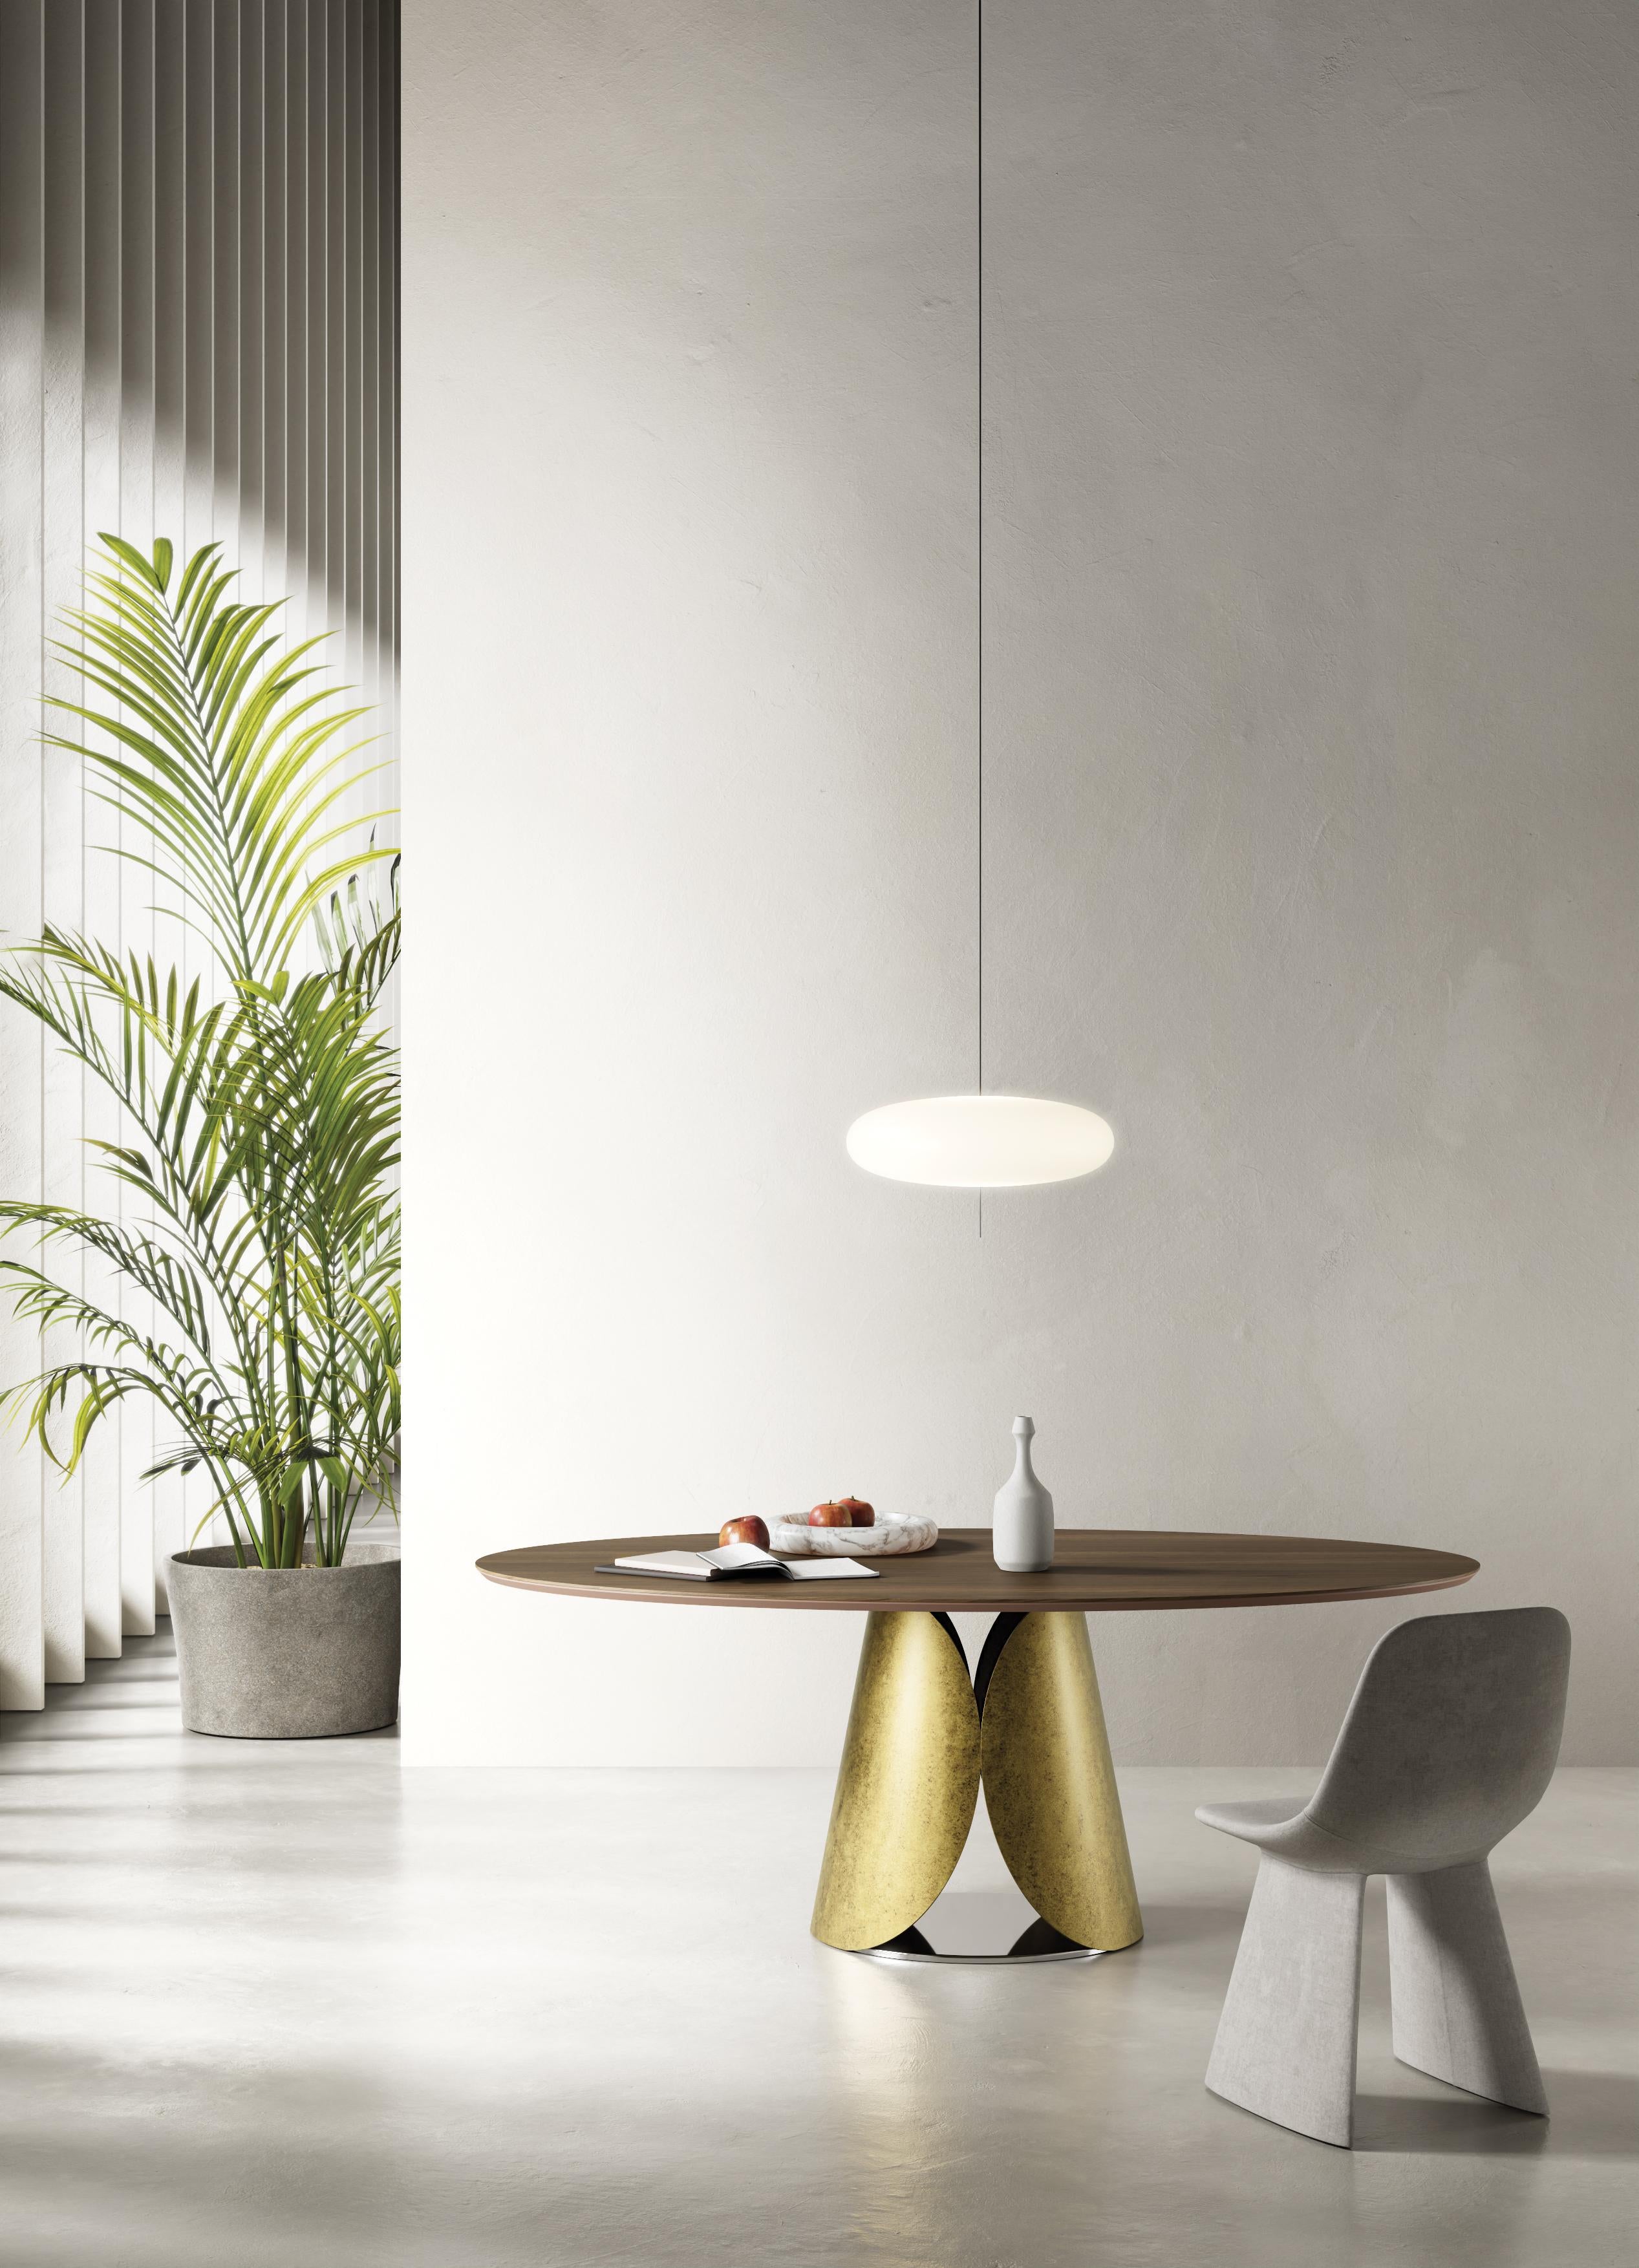 Estia Dining Table by Chinellato Design
Dimensions: D 110 x W 200 x H 71 cm
Materials:
Top:  Canaletto Walnut.
Base: Black Patinated Gold Leaf finish.

In this table, graceful curves take center stage, exuding an enveloping softness that harks back